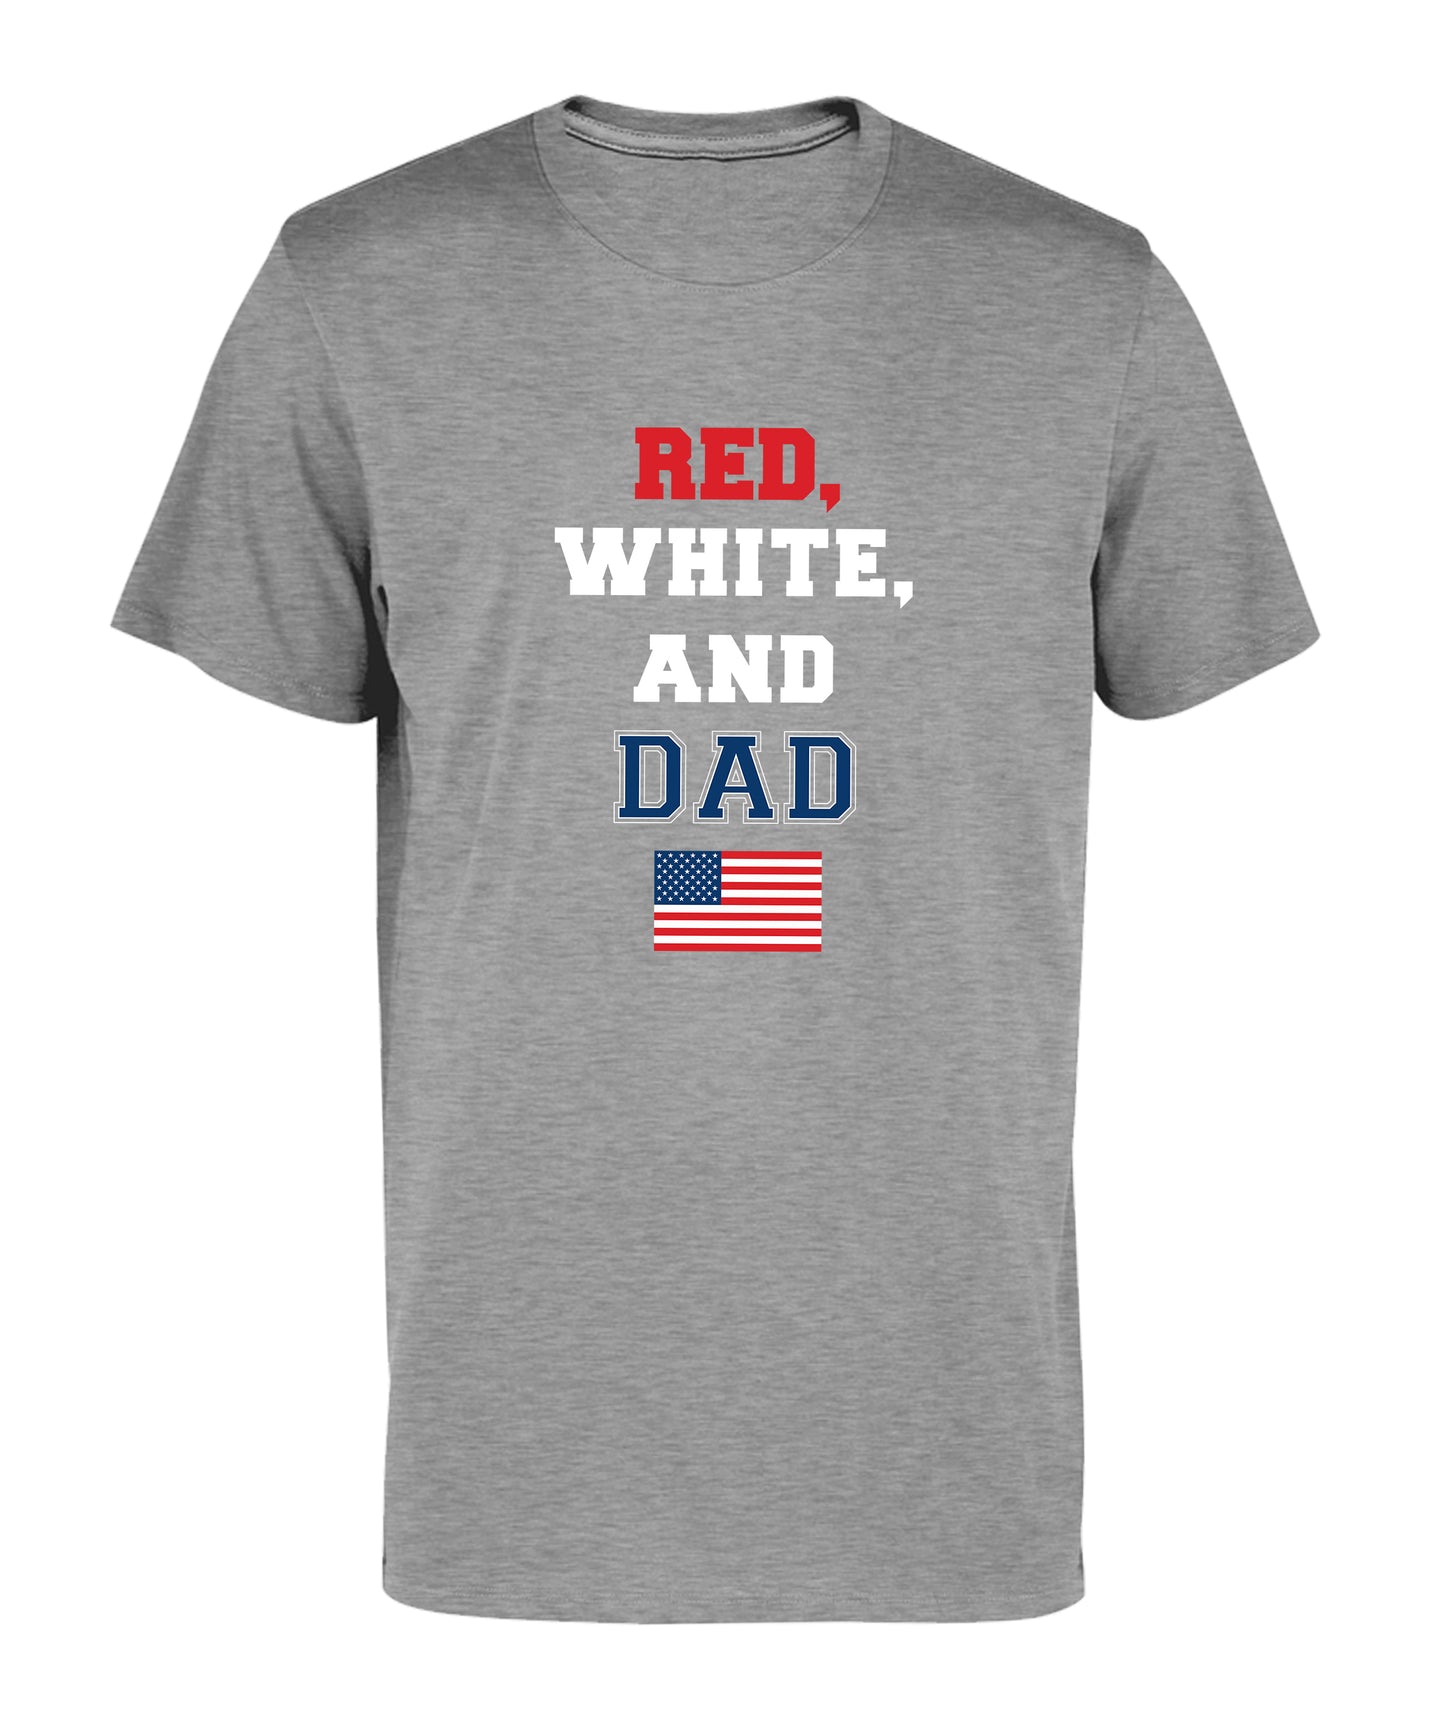 Red White and Dad